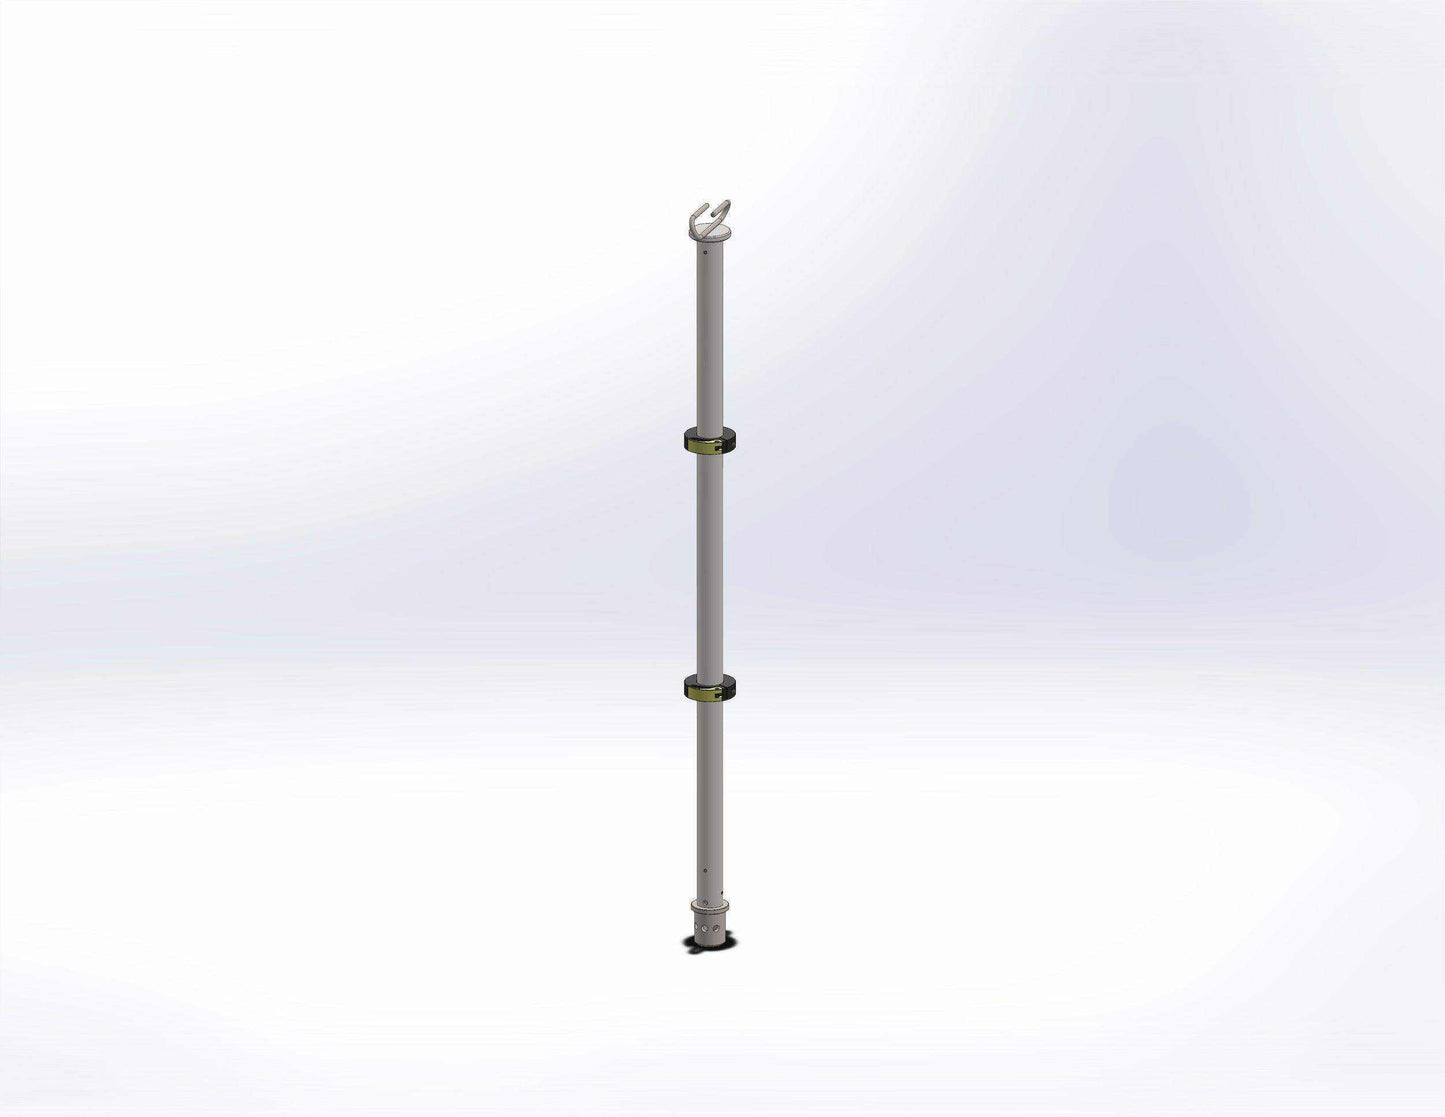 Equipment Pole, Straight with Fixed IV Pole by Rowland Emergency